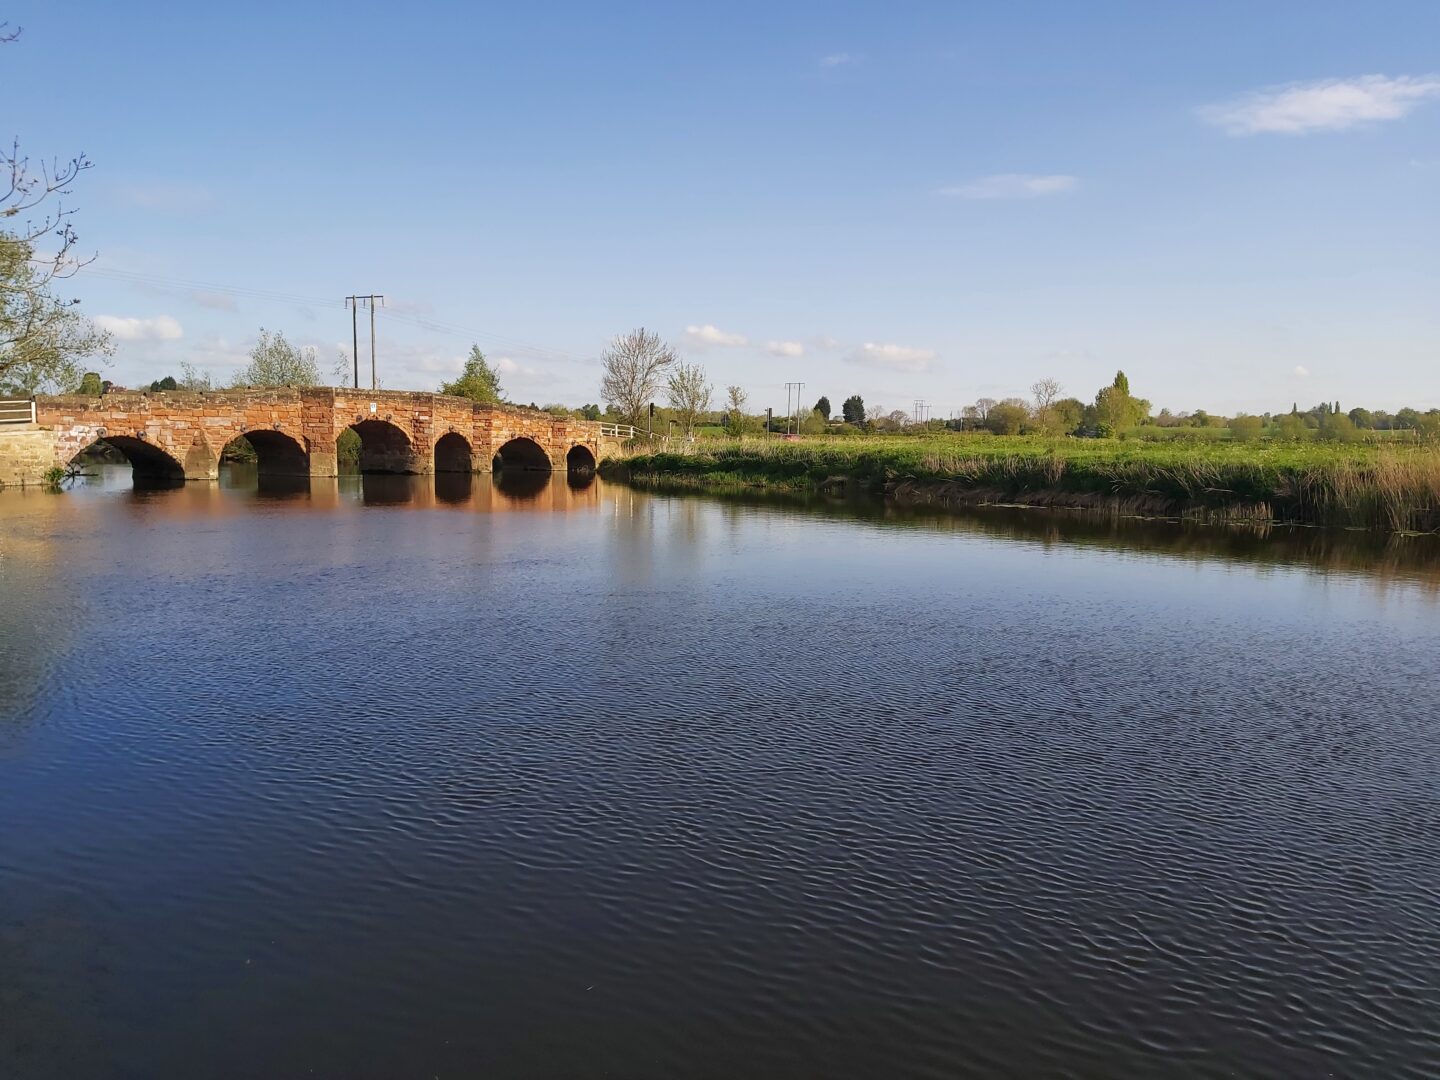 Eckington bridge is a popular place for open water swimming